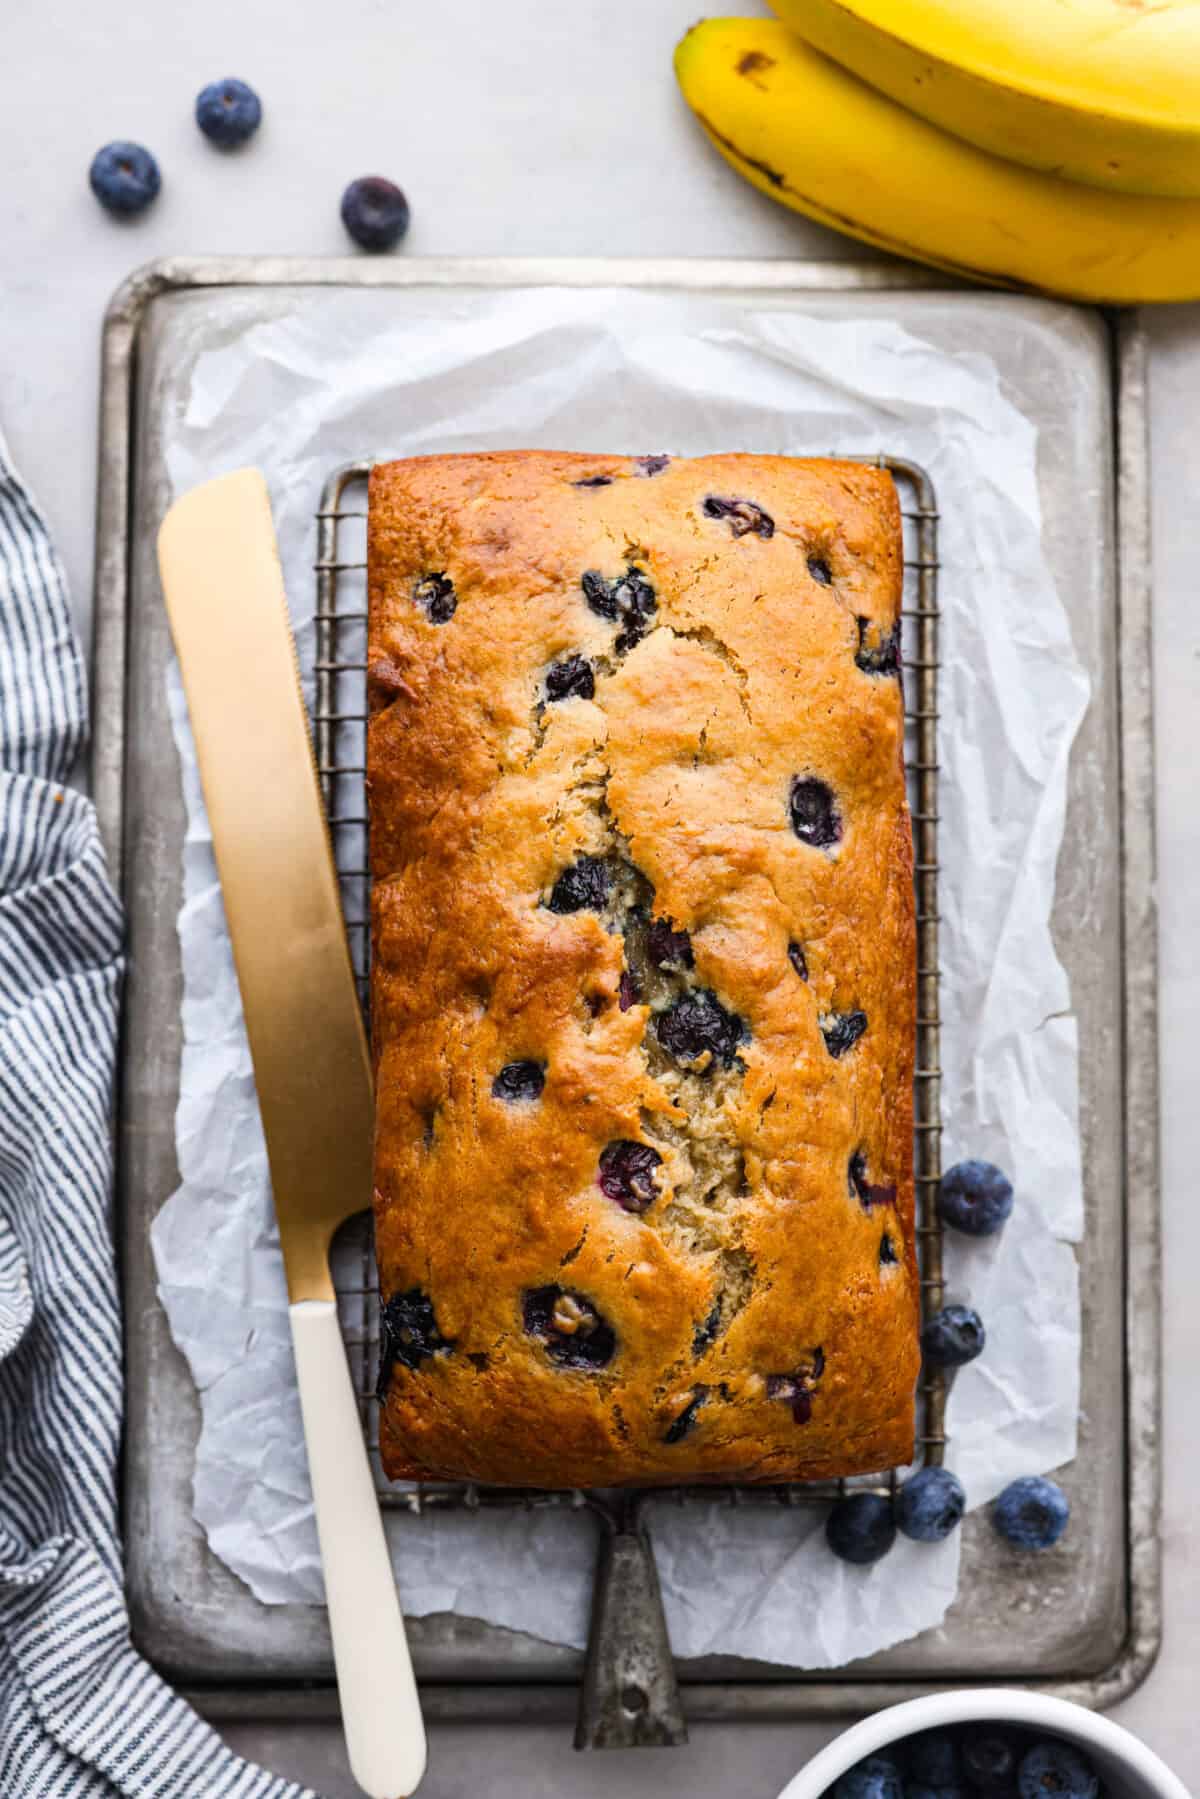 Top-down view of a loaf of blueberry banana bread.